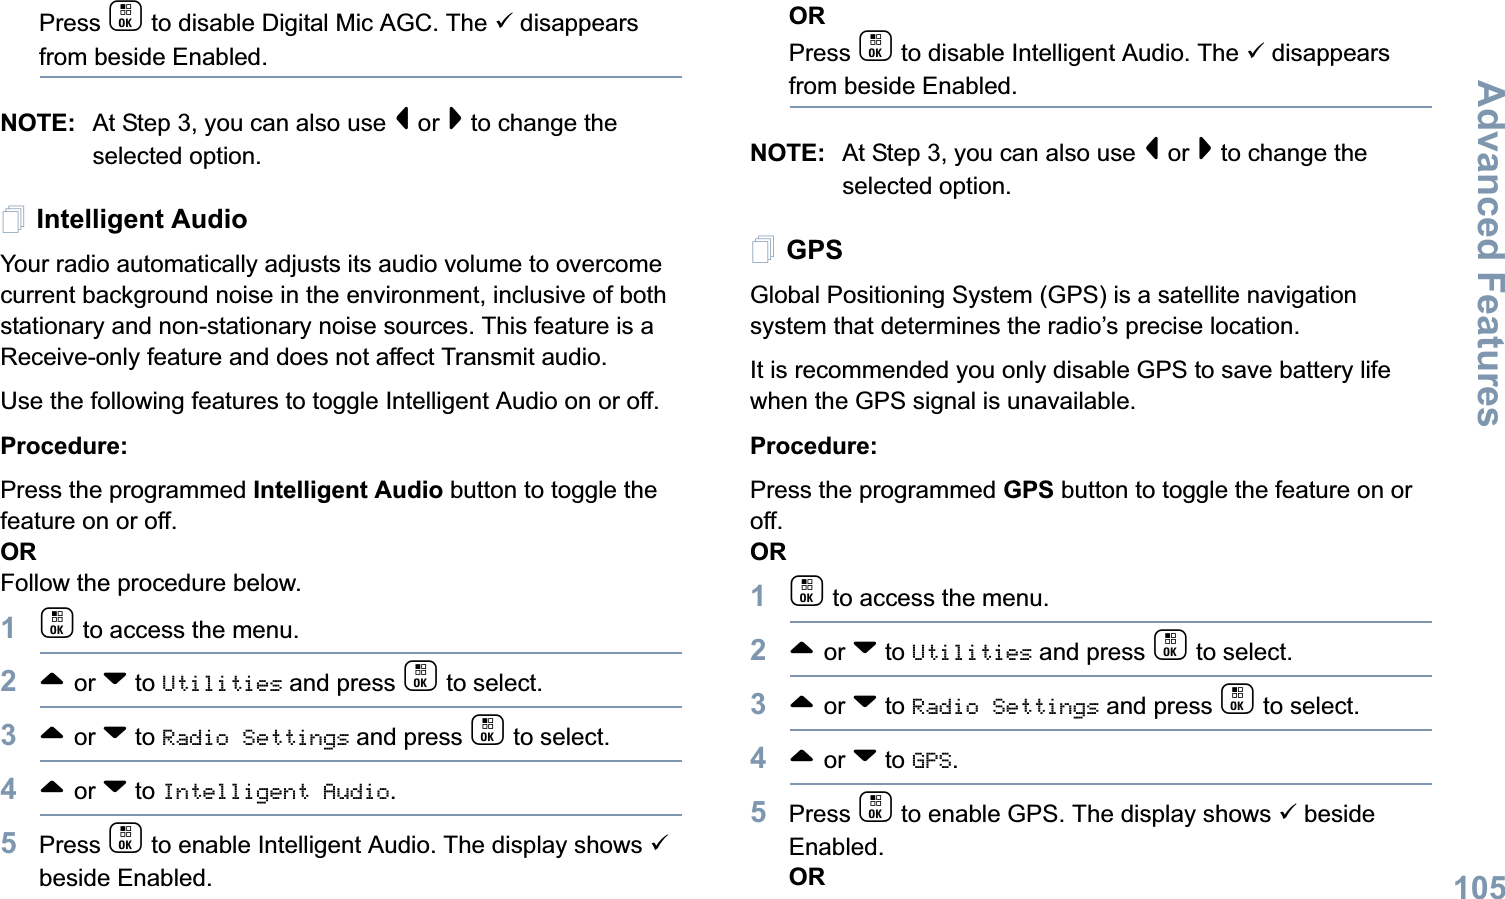 Advanced FeaturesEnglish105Press c to disable Digital Mic AGC. The 9 disappears from beside Enabled.NOTE: At Step 3, you can also use &lt; or &gt; to change the selected option.Intelligent AudioYour radio automatically adjusts its audio volume to overcome current background noise in the environment, inclusive of both stationary and non-stationary noise sources. This feature is a Receive-only feature and does not affect Transmit audio.  Use the following features to toggle Intelligent Audio on or off. Procedure: Press the programmed Intelligent Audio button to toggle the feature on or off. ORFollow the procedure below.1c to access the menu.2^ or v to Utilities and press c to select.3^ or v to Radio Settings and press c to select.4^ or v to Intelligent Audio.5Press c to enable Intelligent Audio. The display shows 9 beside Enabled.ORPress c to disable Intelligent Audio. The 9 disappears from beside Enabled.NOTE: At Step 3, you can also use &lt; or &gt; to change the selected option.GPSGlobal Positioning System (GPS) is a satellite navigation system that determines the radio’s precise location. It is recommended you only disable GPS to save battery life when the GPS signal is unavailable.Procedure:Press the programmed GPS button to toggle the feature on or off.OR1c to access the menu.2^ or v to Utilities and press c to select.3^ or v to Radio Settings and press c to select.4^ or v to GPS.5Press c to enable GPS. The display shows 9 beside Enabled.OR